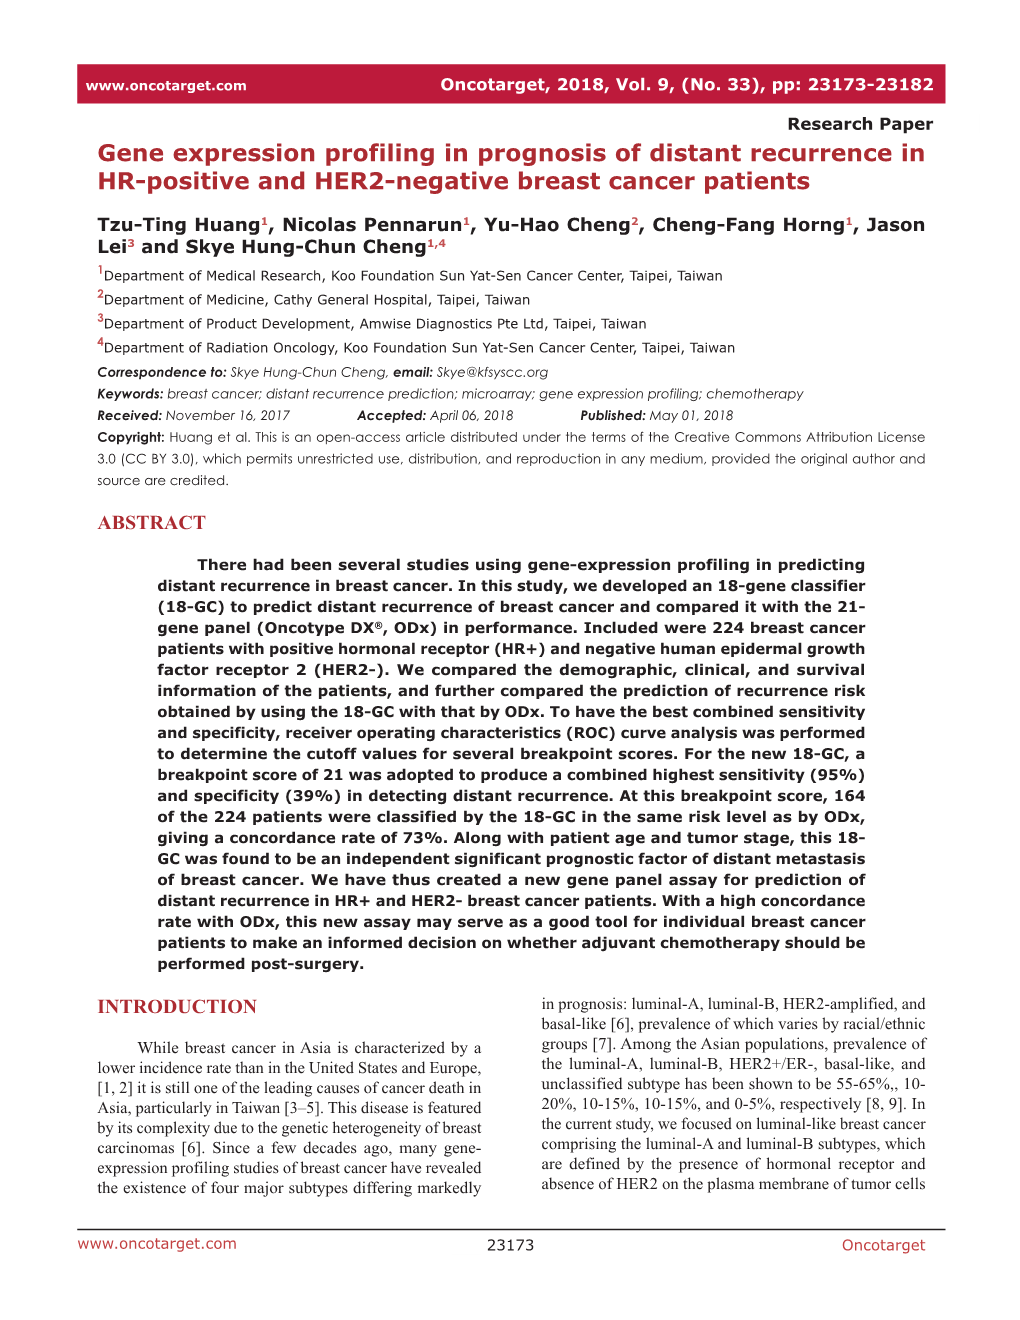 Gene Expression Profiling in Prognosis of Distant Recurrence in HR-Positive and HER2-Negative Breast Cancer Patients